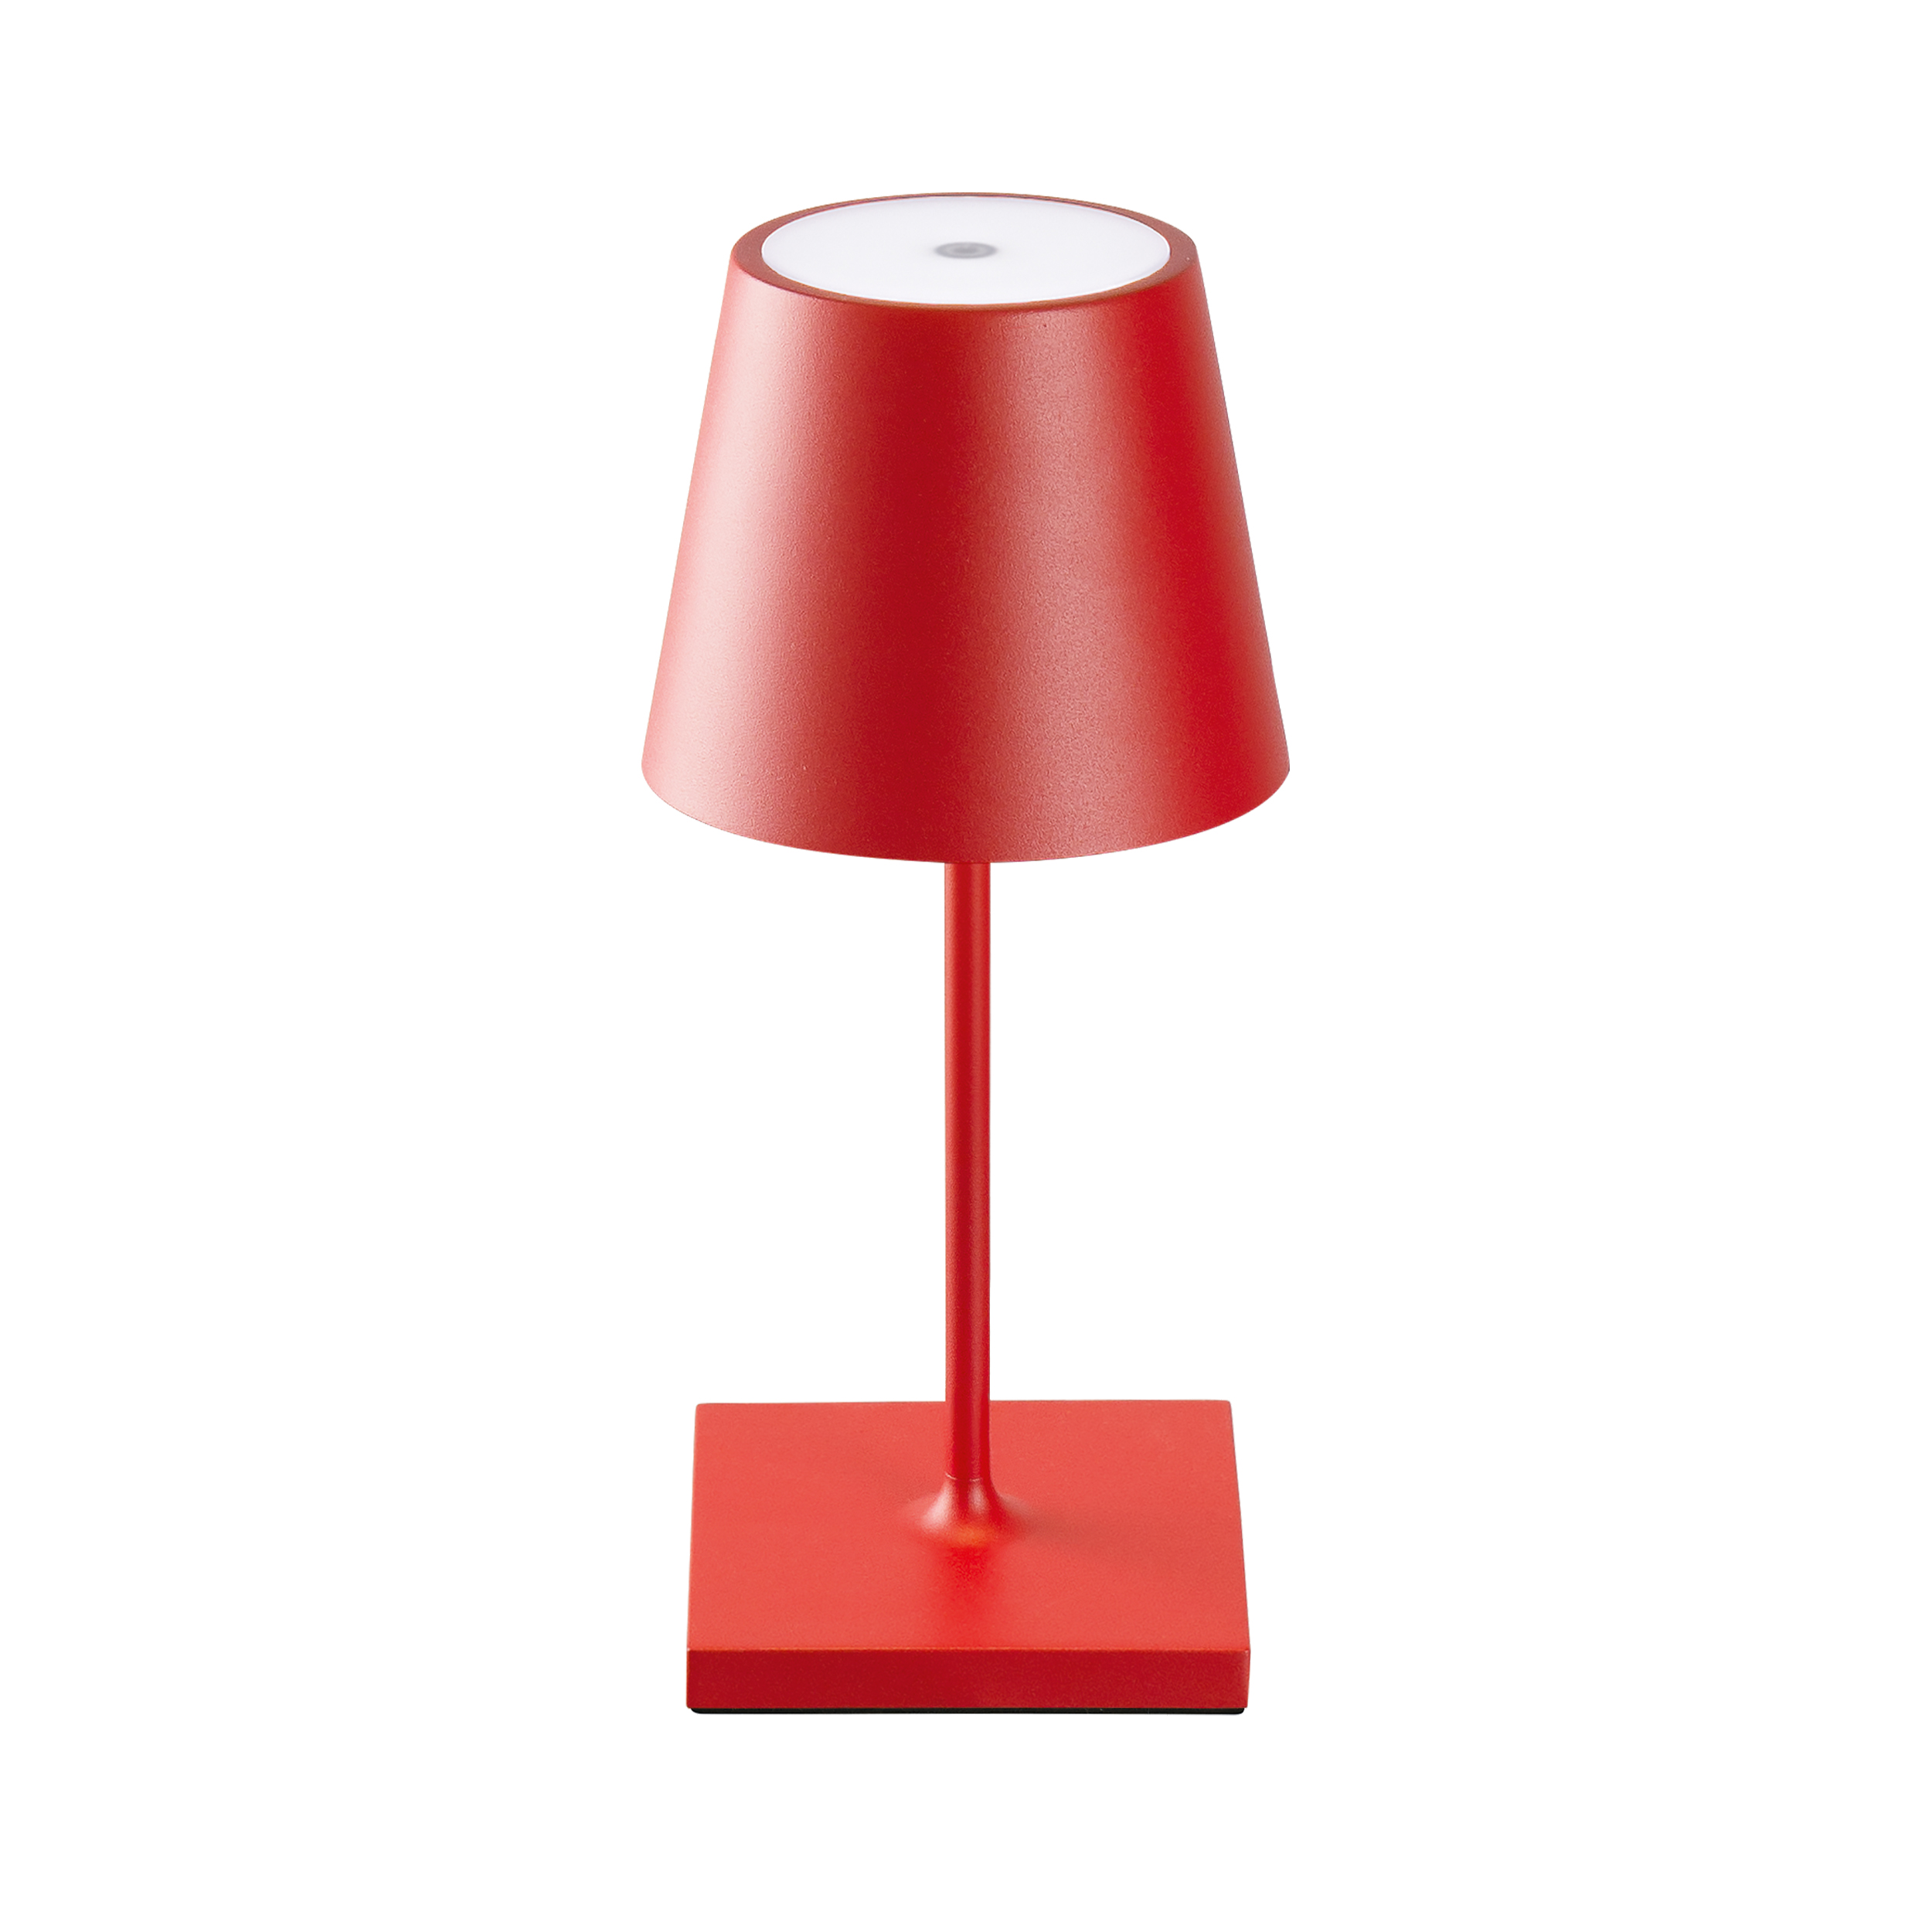 SIGOR Table NUINDIE Mini Feuerrot warmweiss Lamp LED